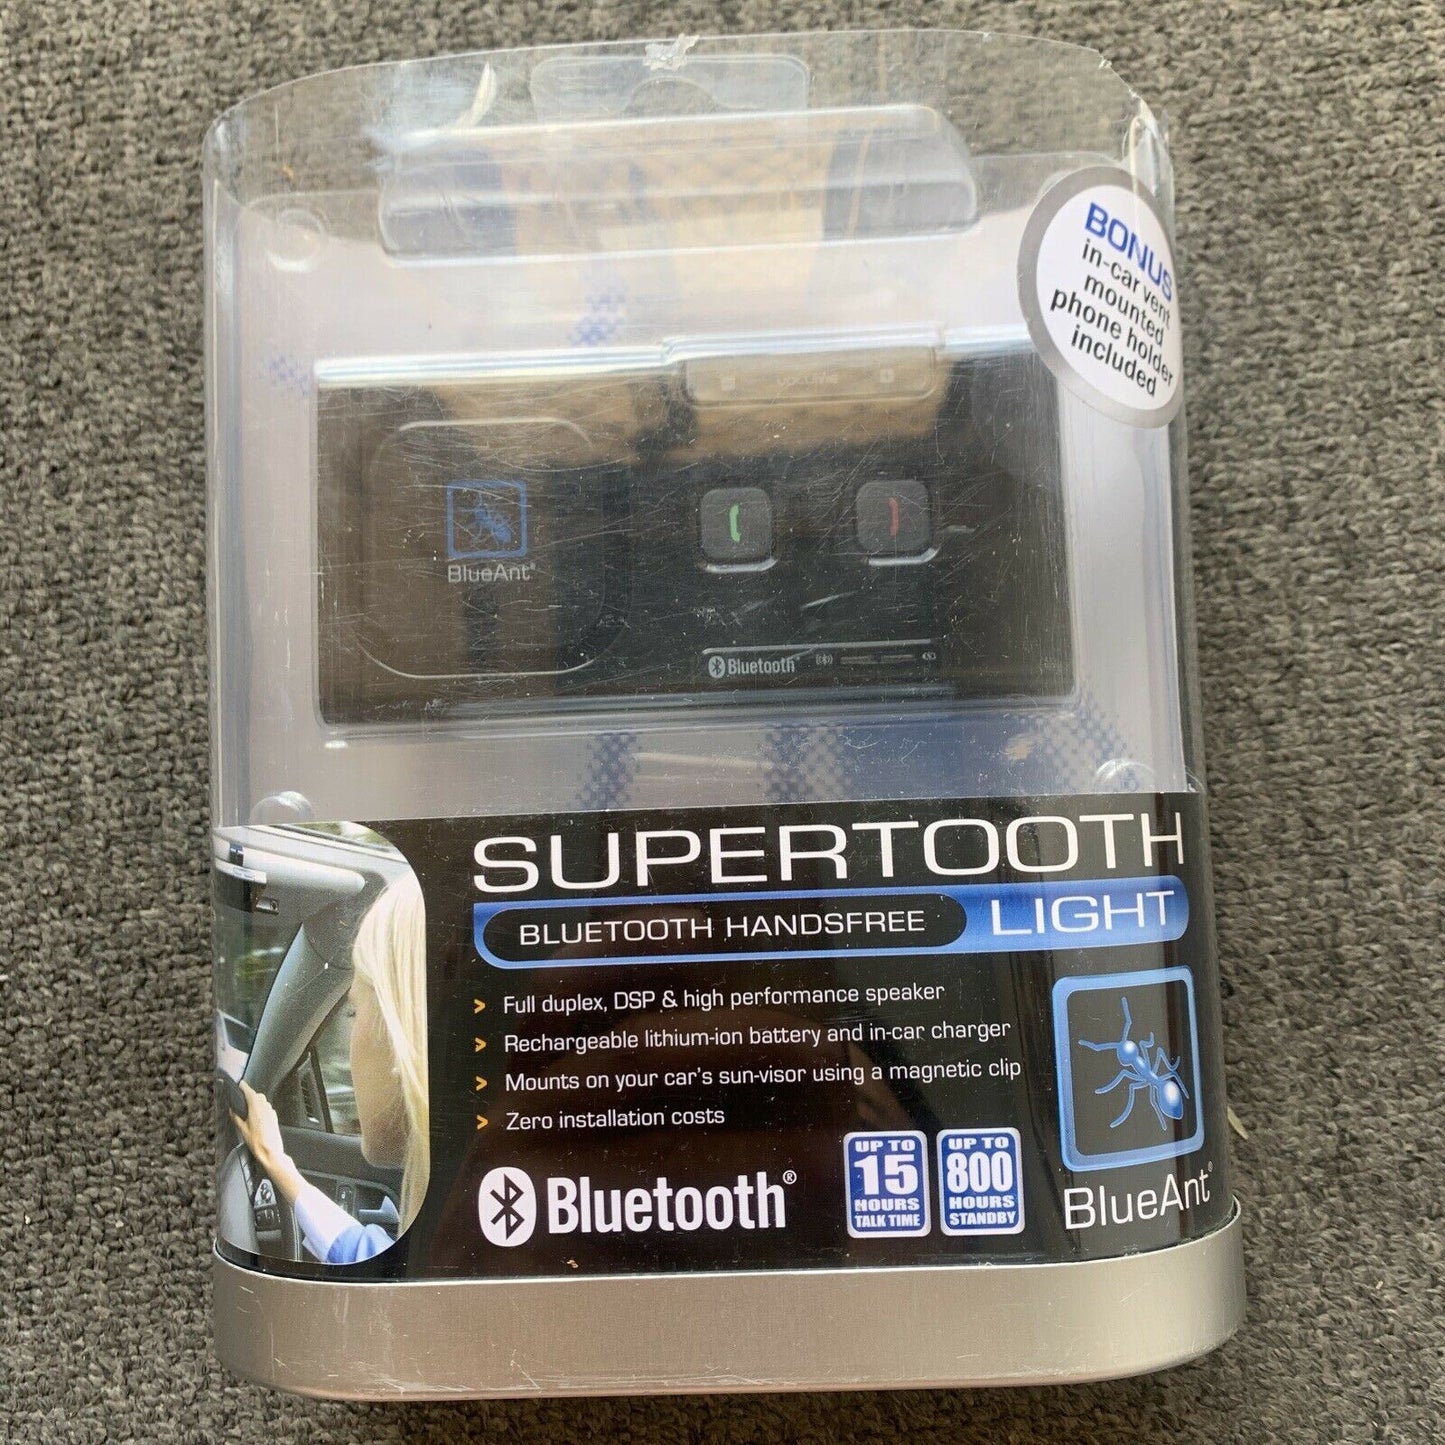 BlueAnt - Supertooth Bluetooth Light Hands-free Speaker/Microphone For Car